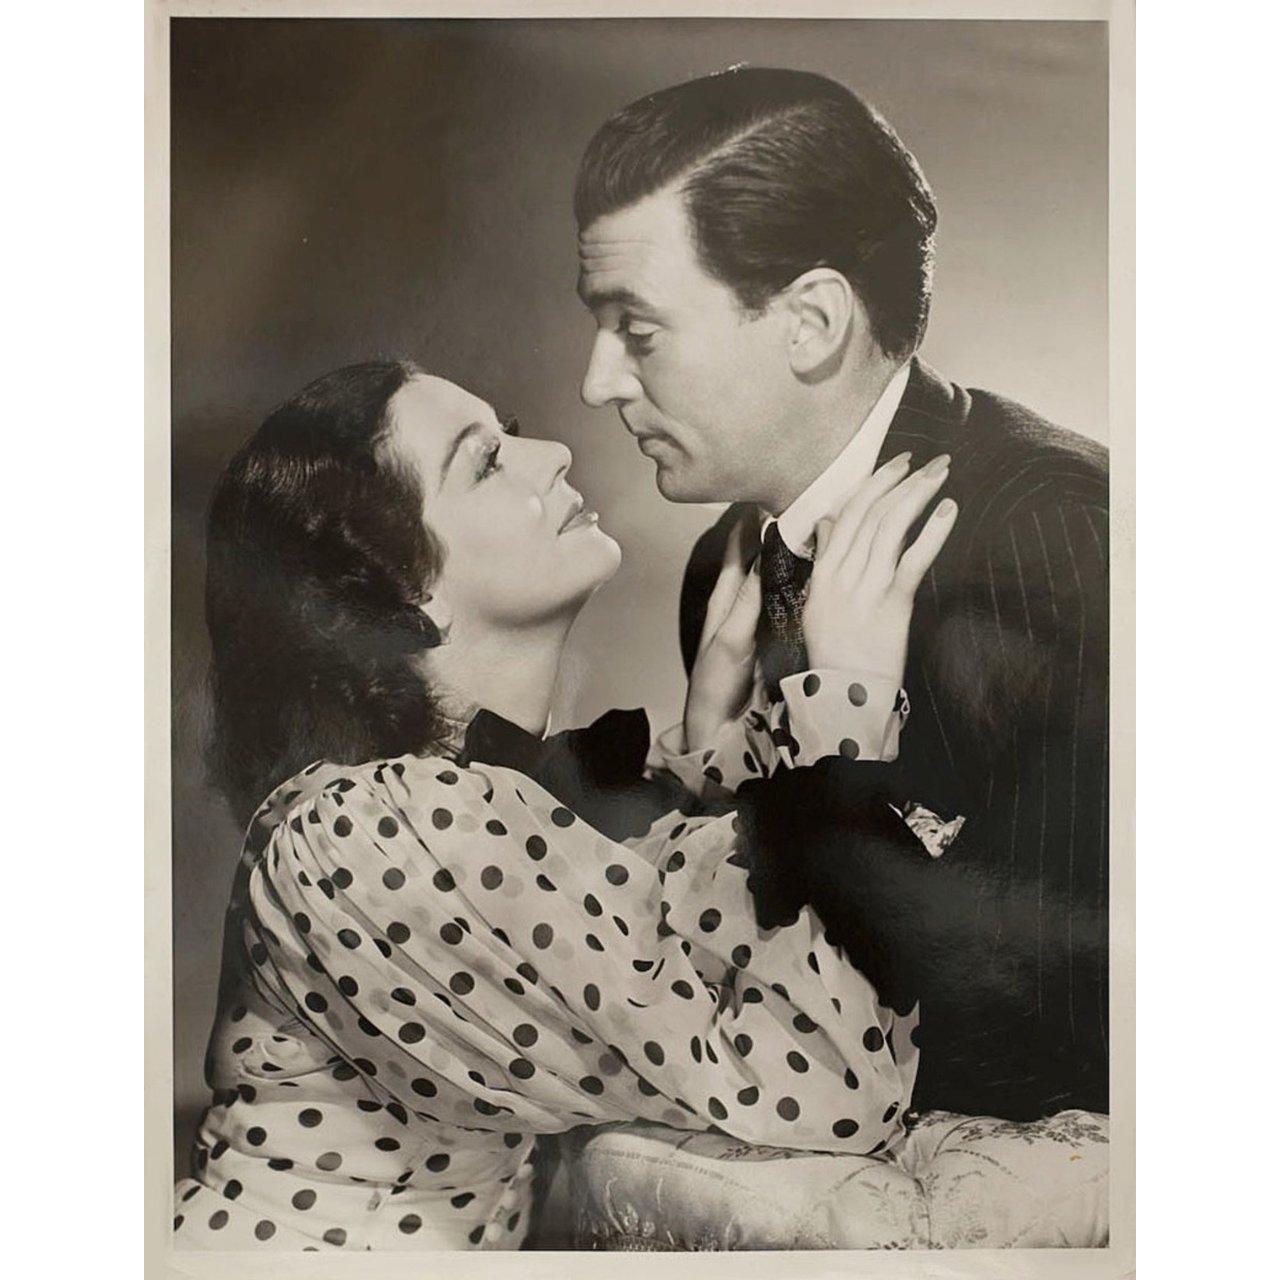 Original 1938 U.S. silver gelatin single-weight photo for the film Man-Proof directed by Richard Thorpe with Myrna Loy / Franchot Tone / Rosalind Russell / Walter Pidgeon. Fine condition. Please note: the size is stated in inches and the actual size